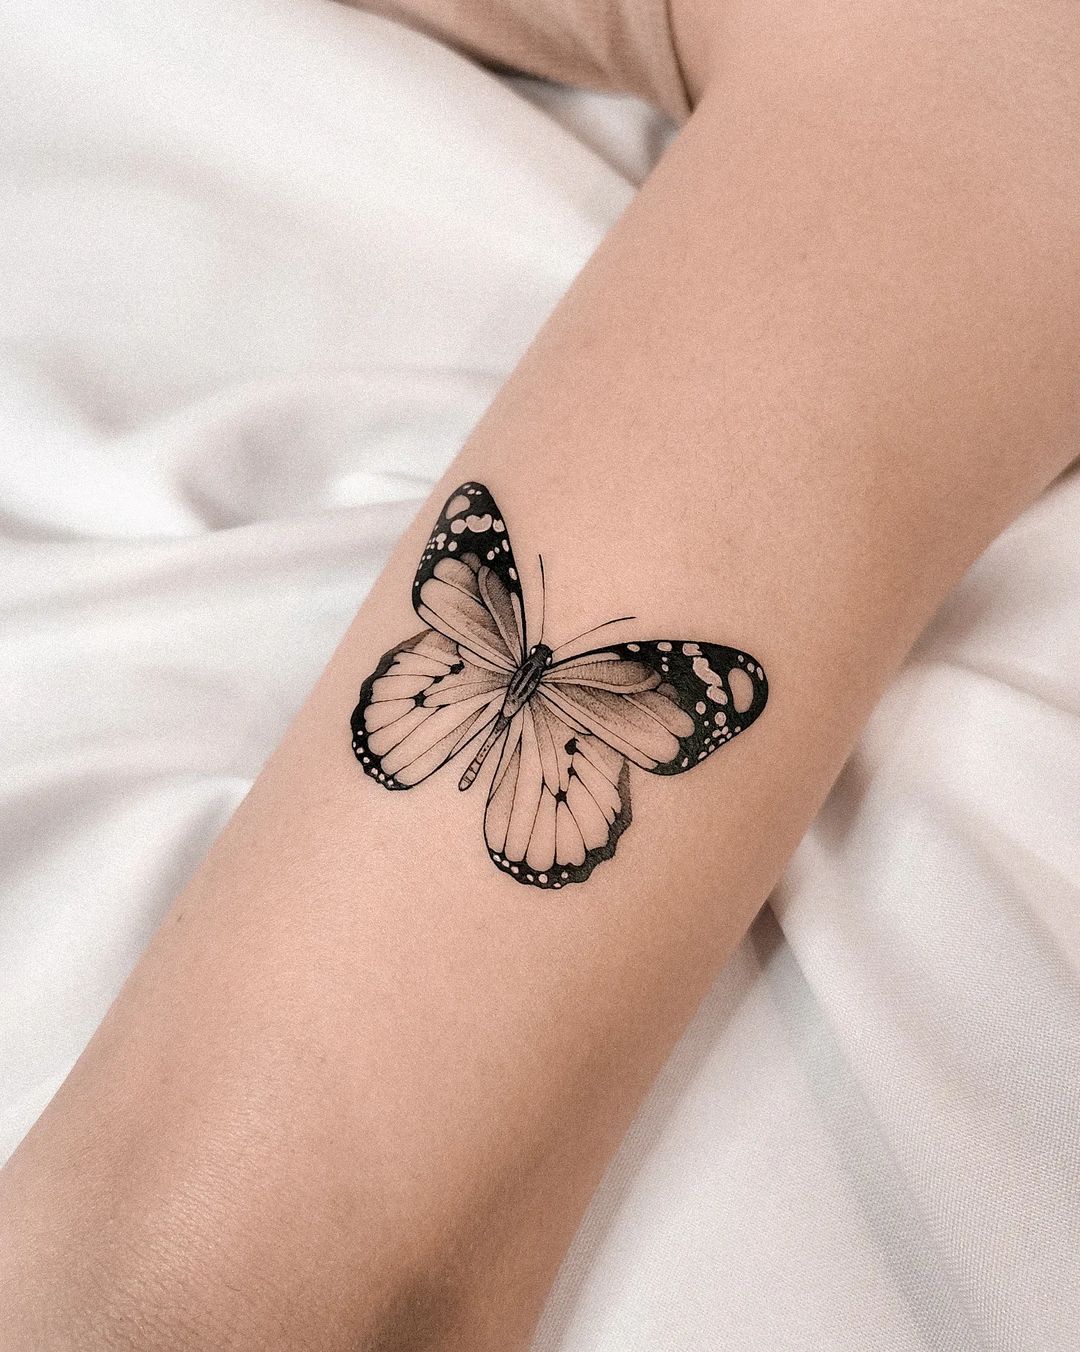 Black and White Monarch Butterfly Tattoo